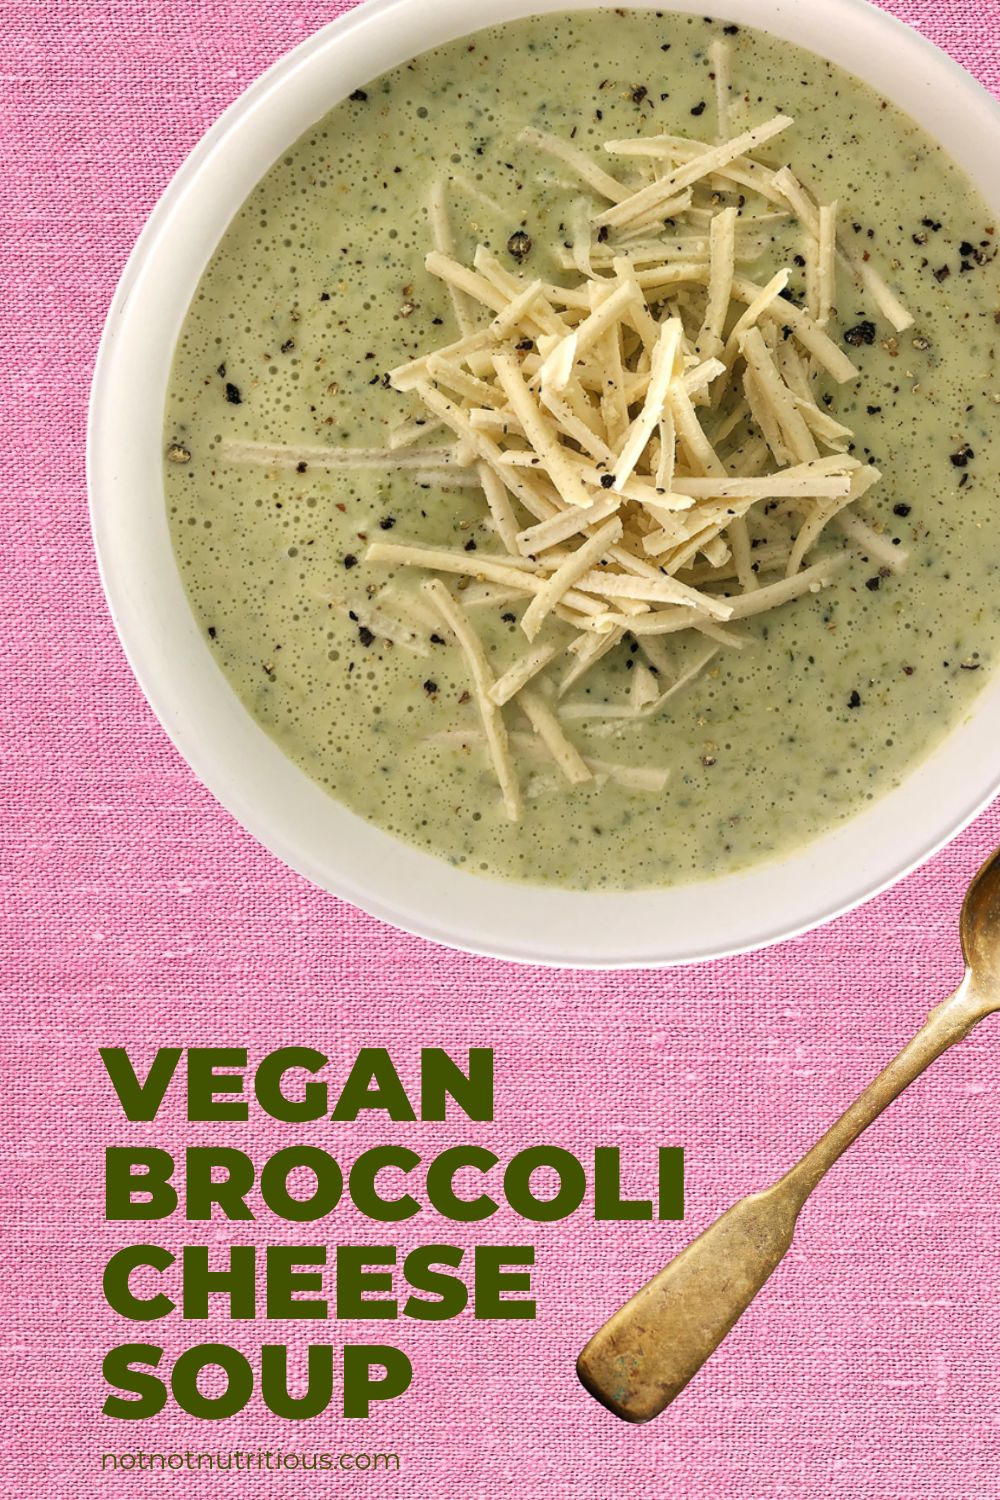 Pin for Vegan Broccoli Cheese Soup, with plant-based cheese garnishing the soup in a white bowl, against a pink background